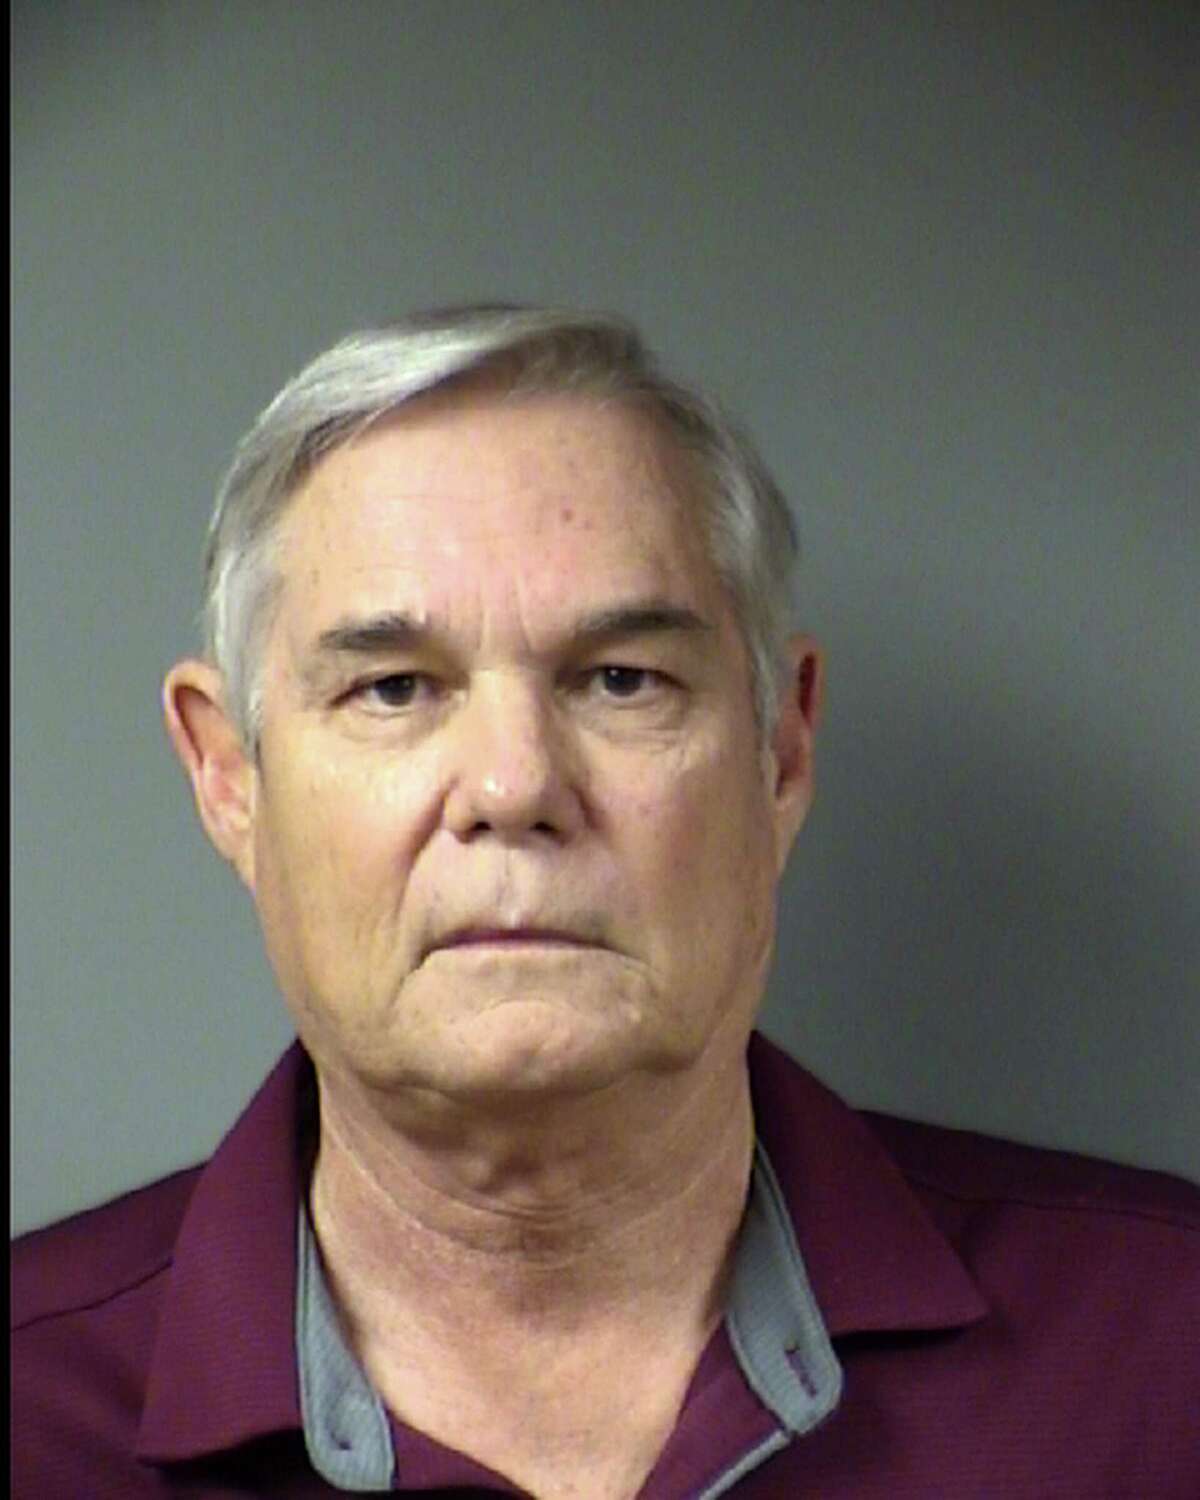 San Antonio District 10 City Councilman Clayton Perry is seen in a Nov. 10 booking photo provided by the Bexar County Sheriff’s Office. Perry, 67, was arrested after he was accused of fleeing a crash he caused Nov. 6 on the Northeast Side. He has been charged with driving while intoxicated and failure to stop and give information.